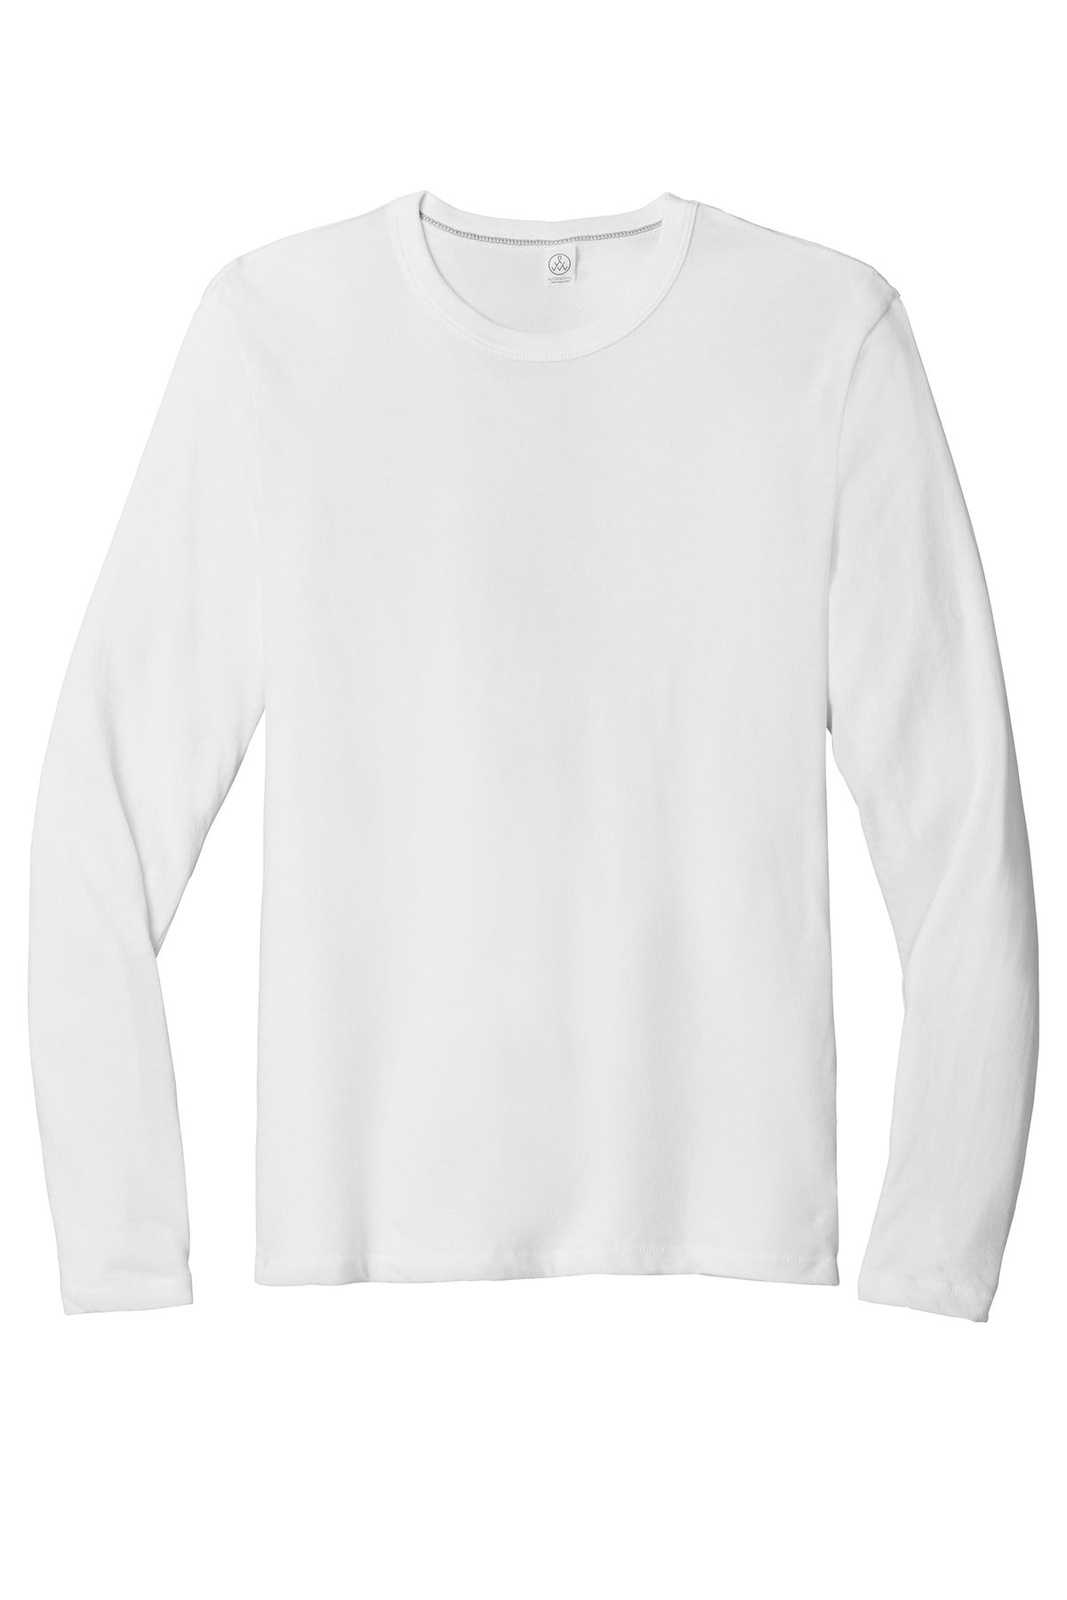 Alternative AA5100 The Keeper Vintage 50/50 Long Sleeve Tee - White - HIT a Double - 5